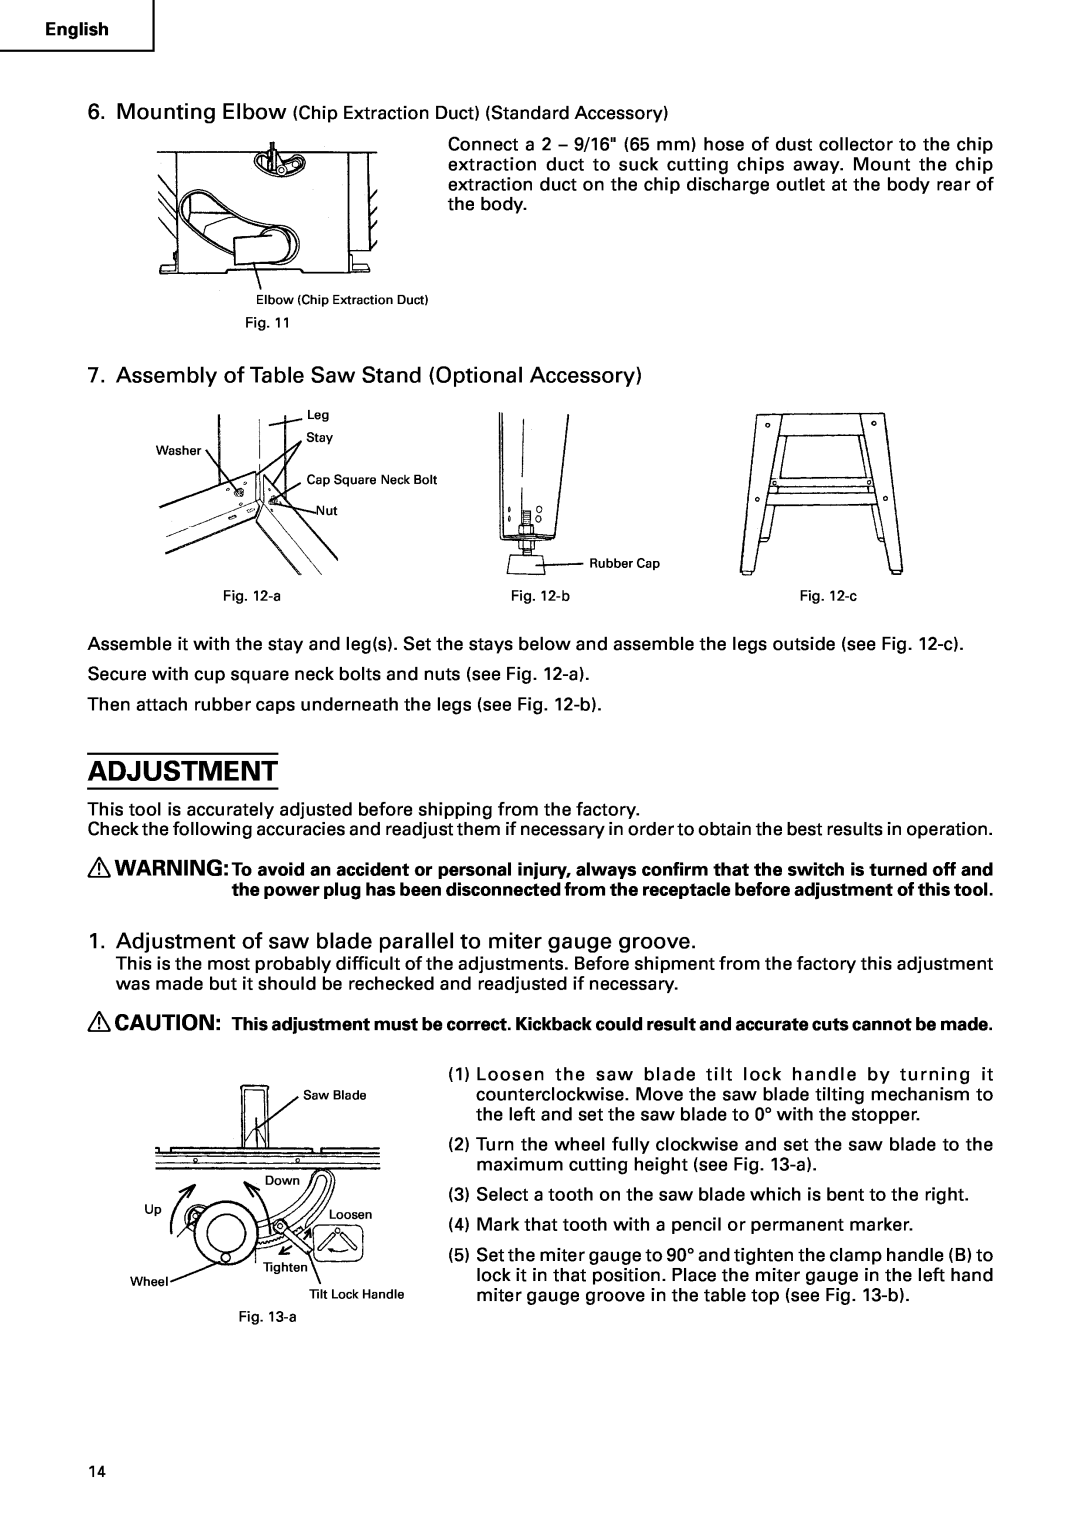 Hitachi C10RA2 instruction manual Adjustment, Assembly of Table Saw Stand Optional Accessory 